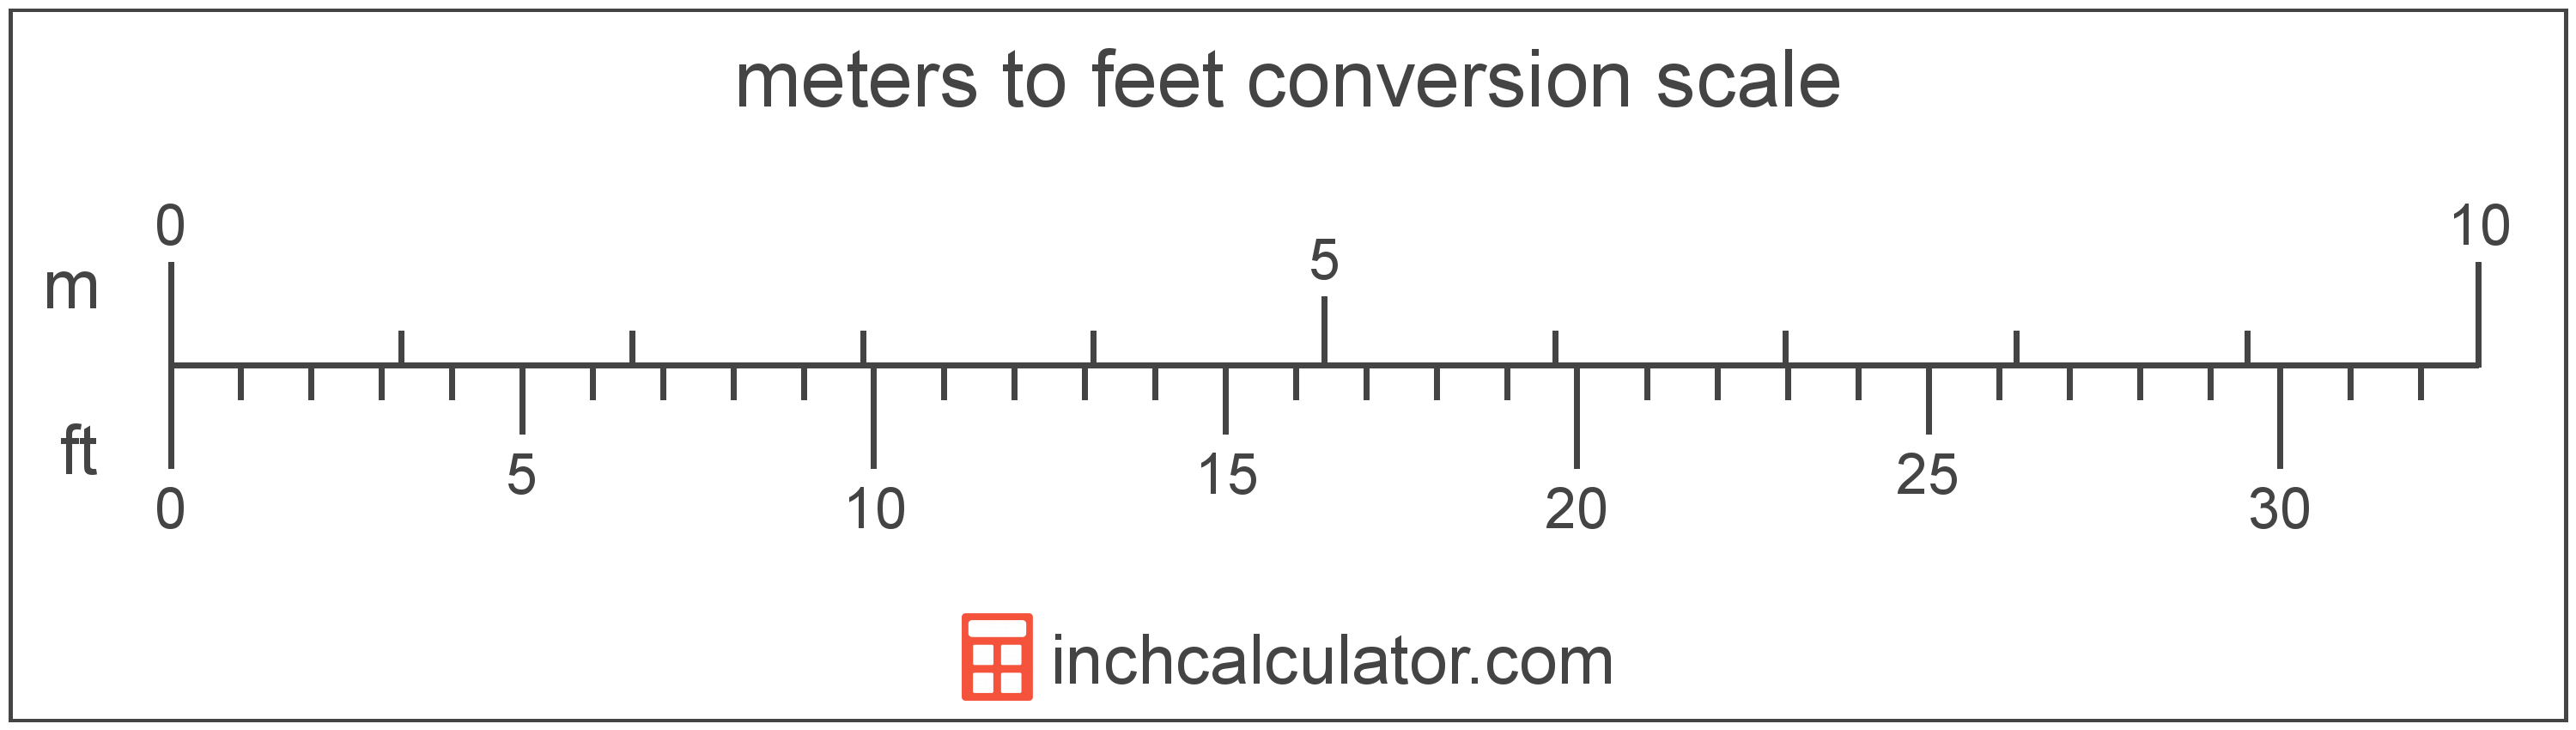 Meters to Feet and Inches Converter (m to ft & in) - Inch Calculator